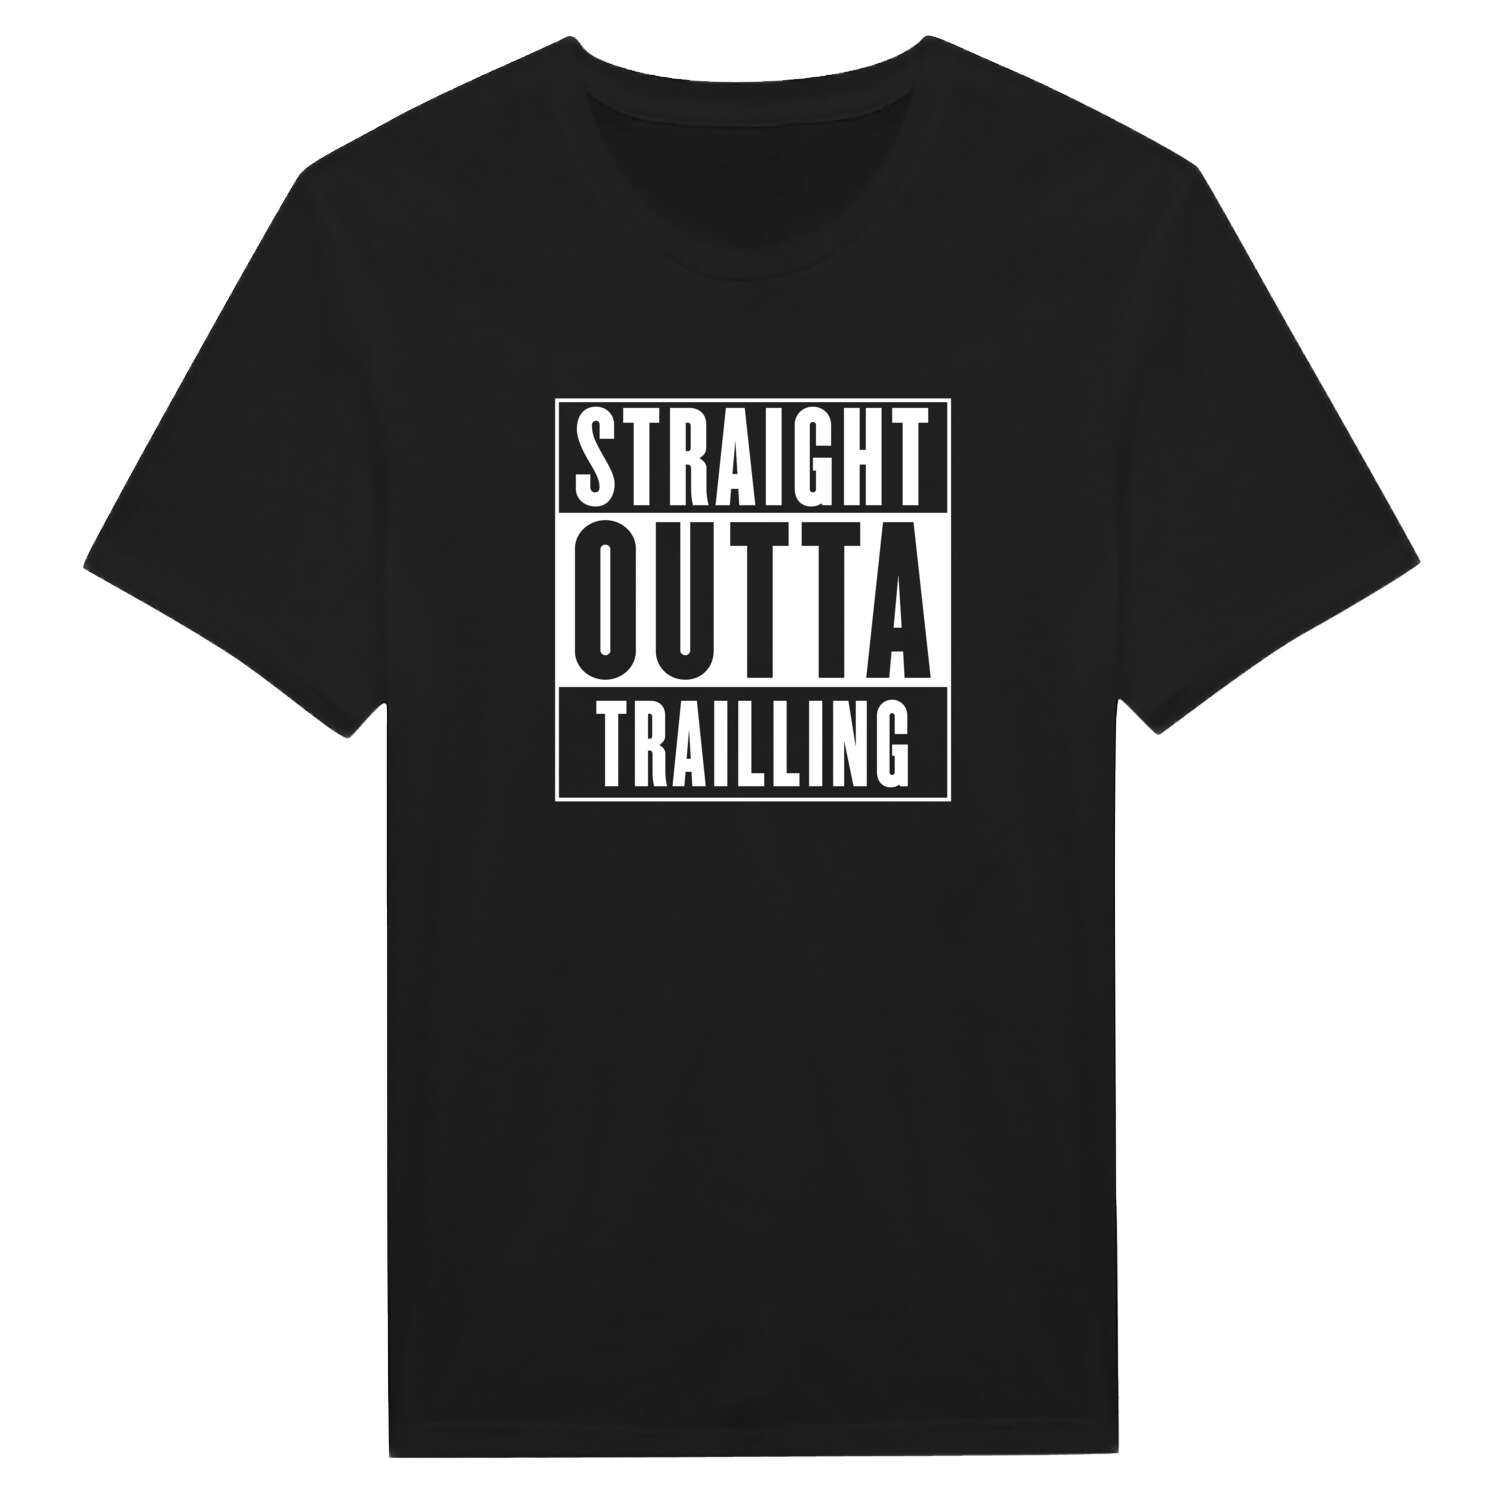 Trailling T-Shirt »Straight Outta«